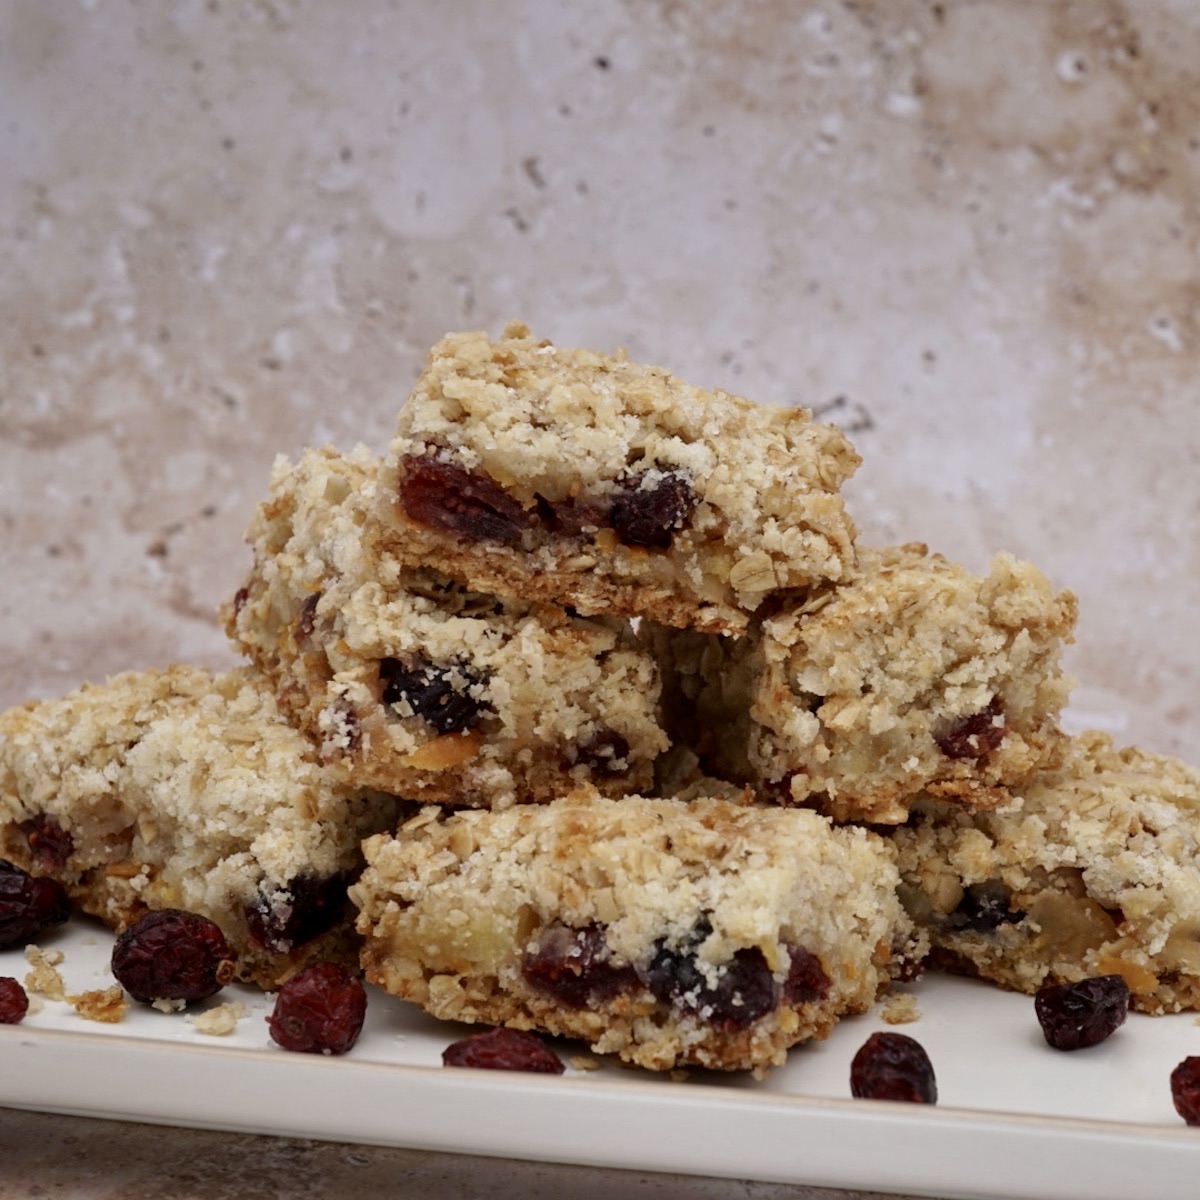 A stack of fruit crumble bars